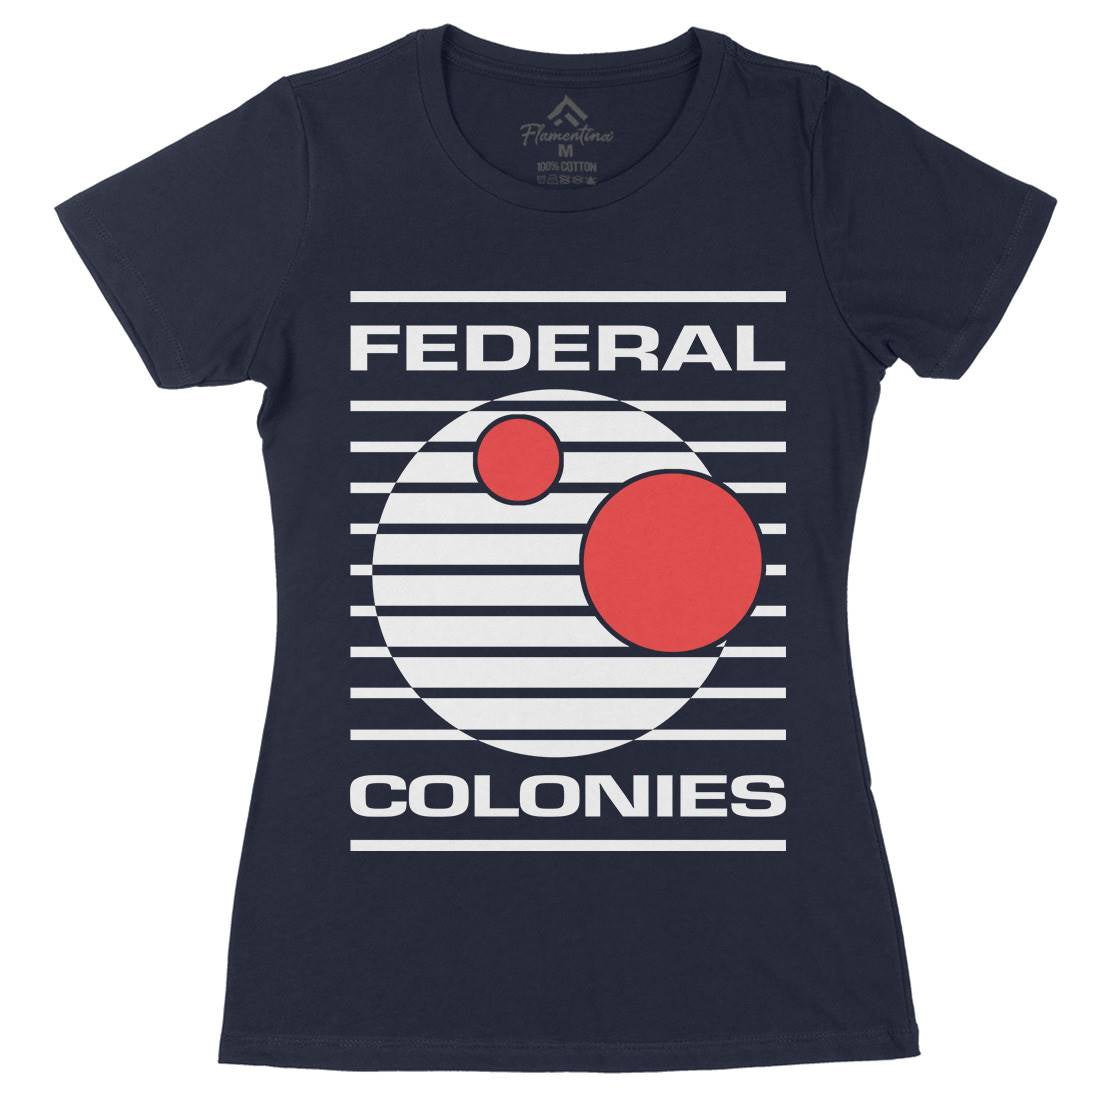 Federal Colonies Womens Organic Crew Neck T-Shirt Space D409